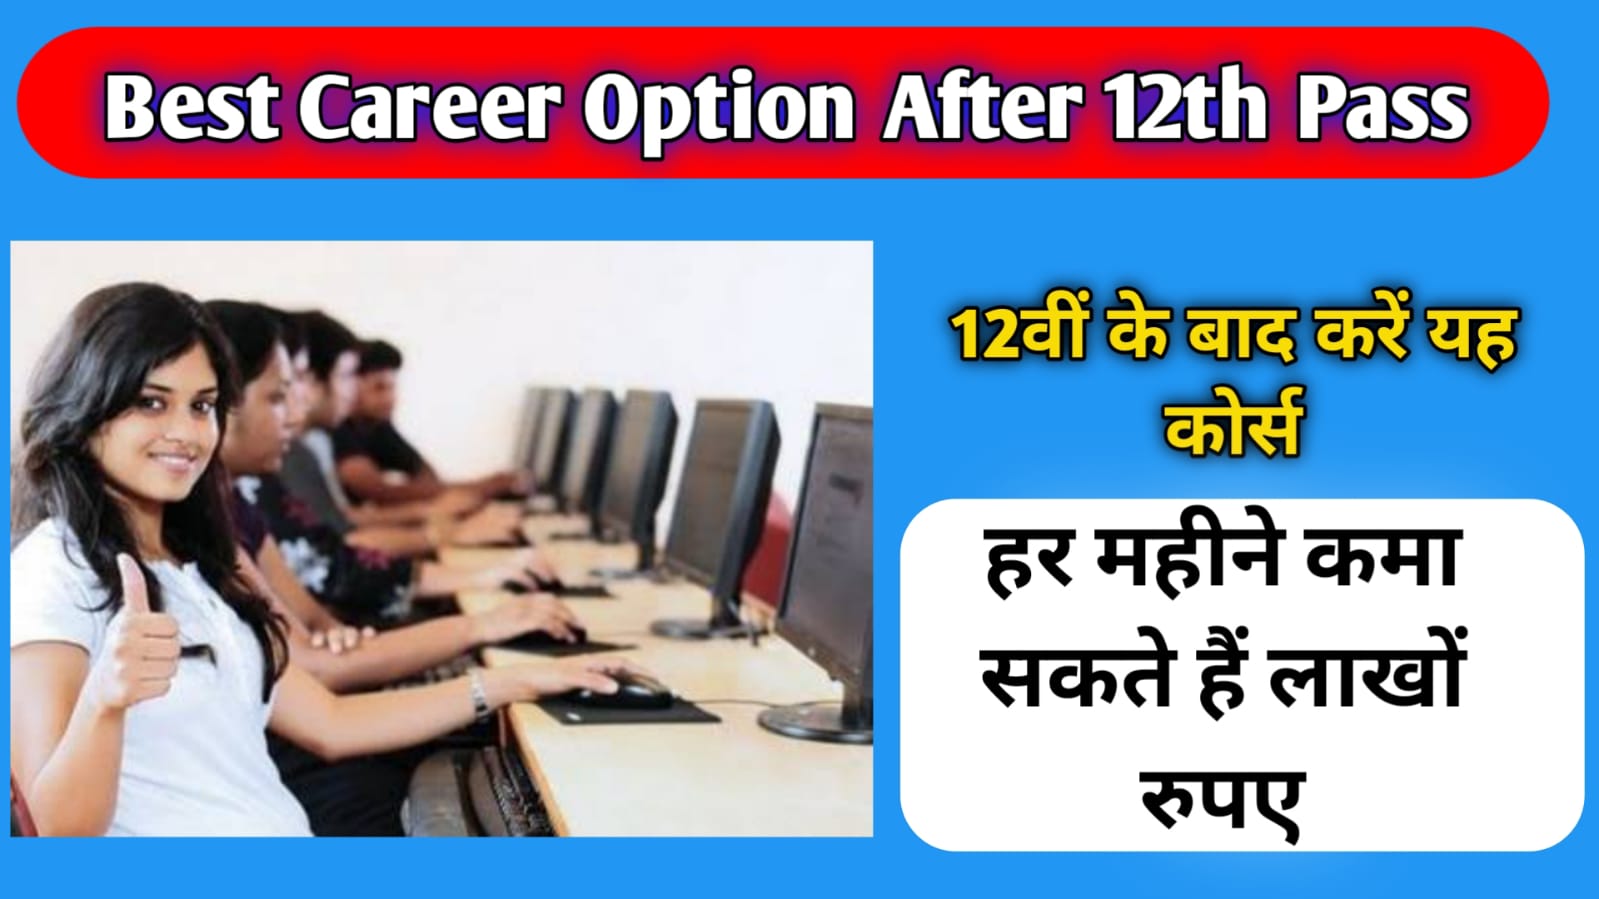 Best Career Options After 12th Pass